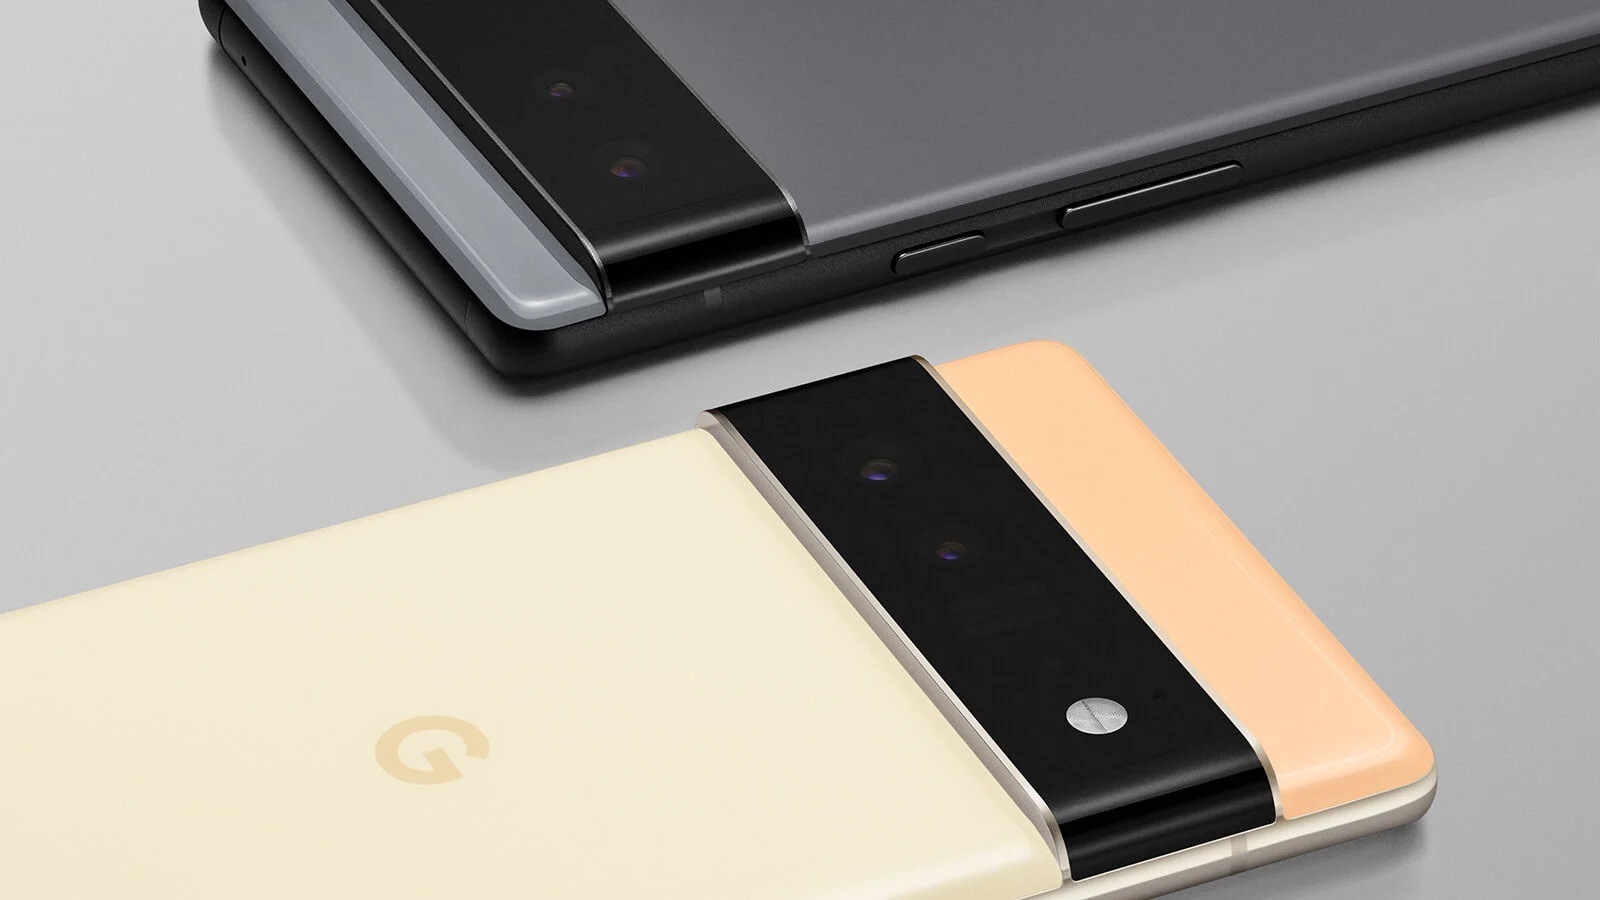 Production of Google Pixel 6 and 6 Pro smartphones will remain in China because of COVID-19